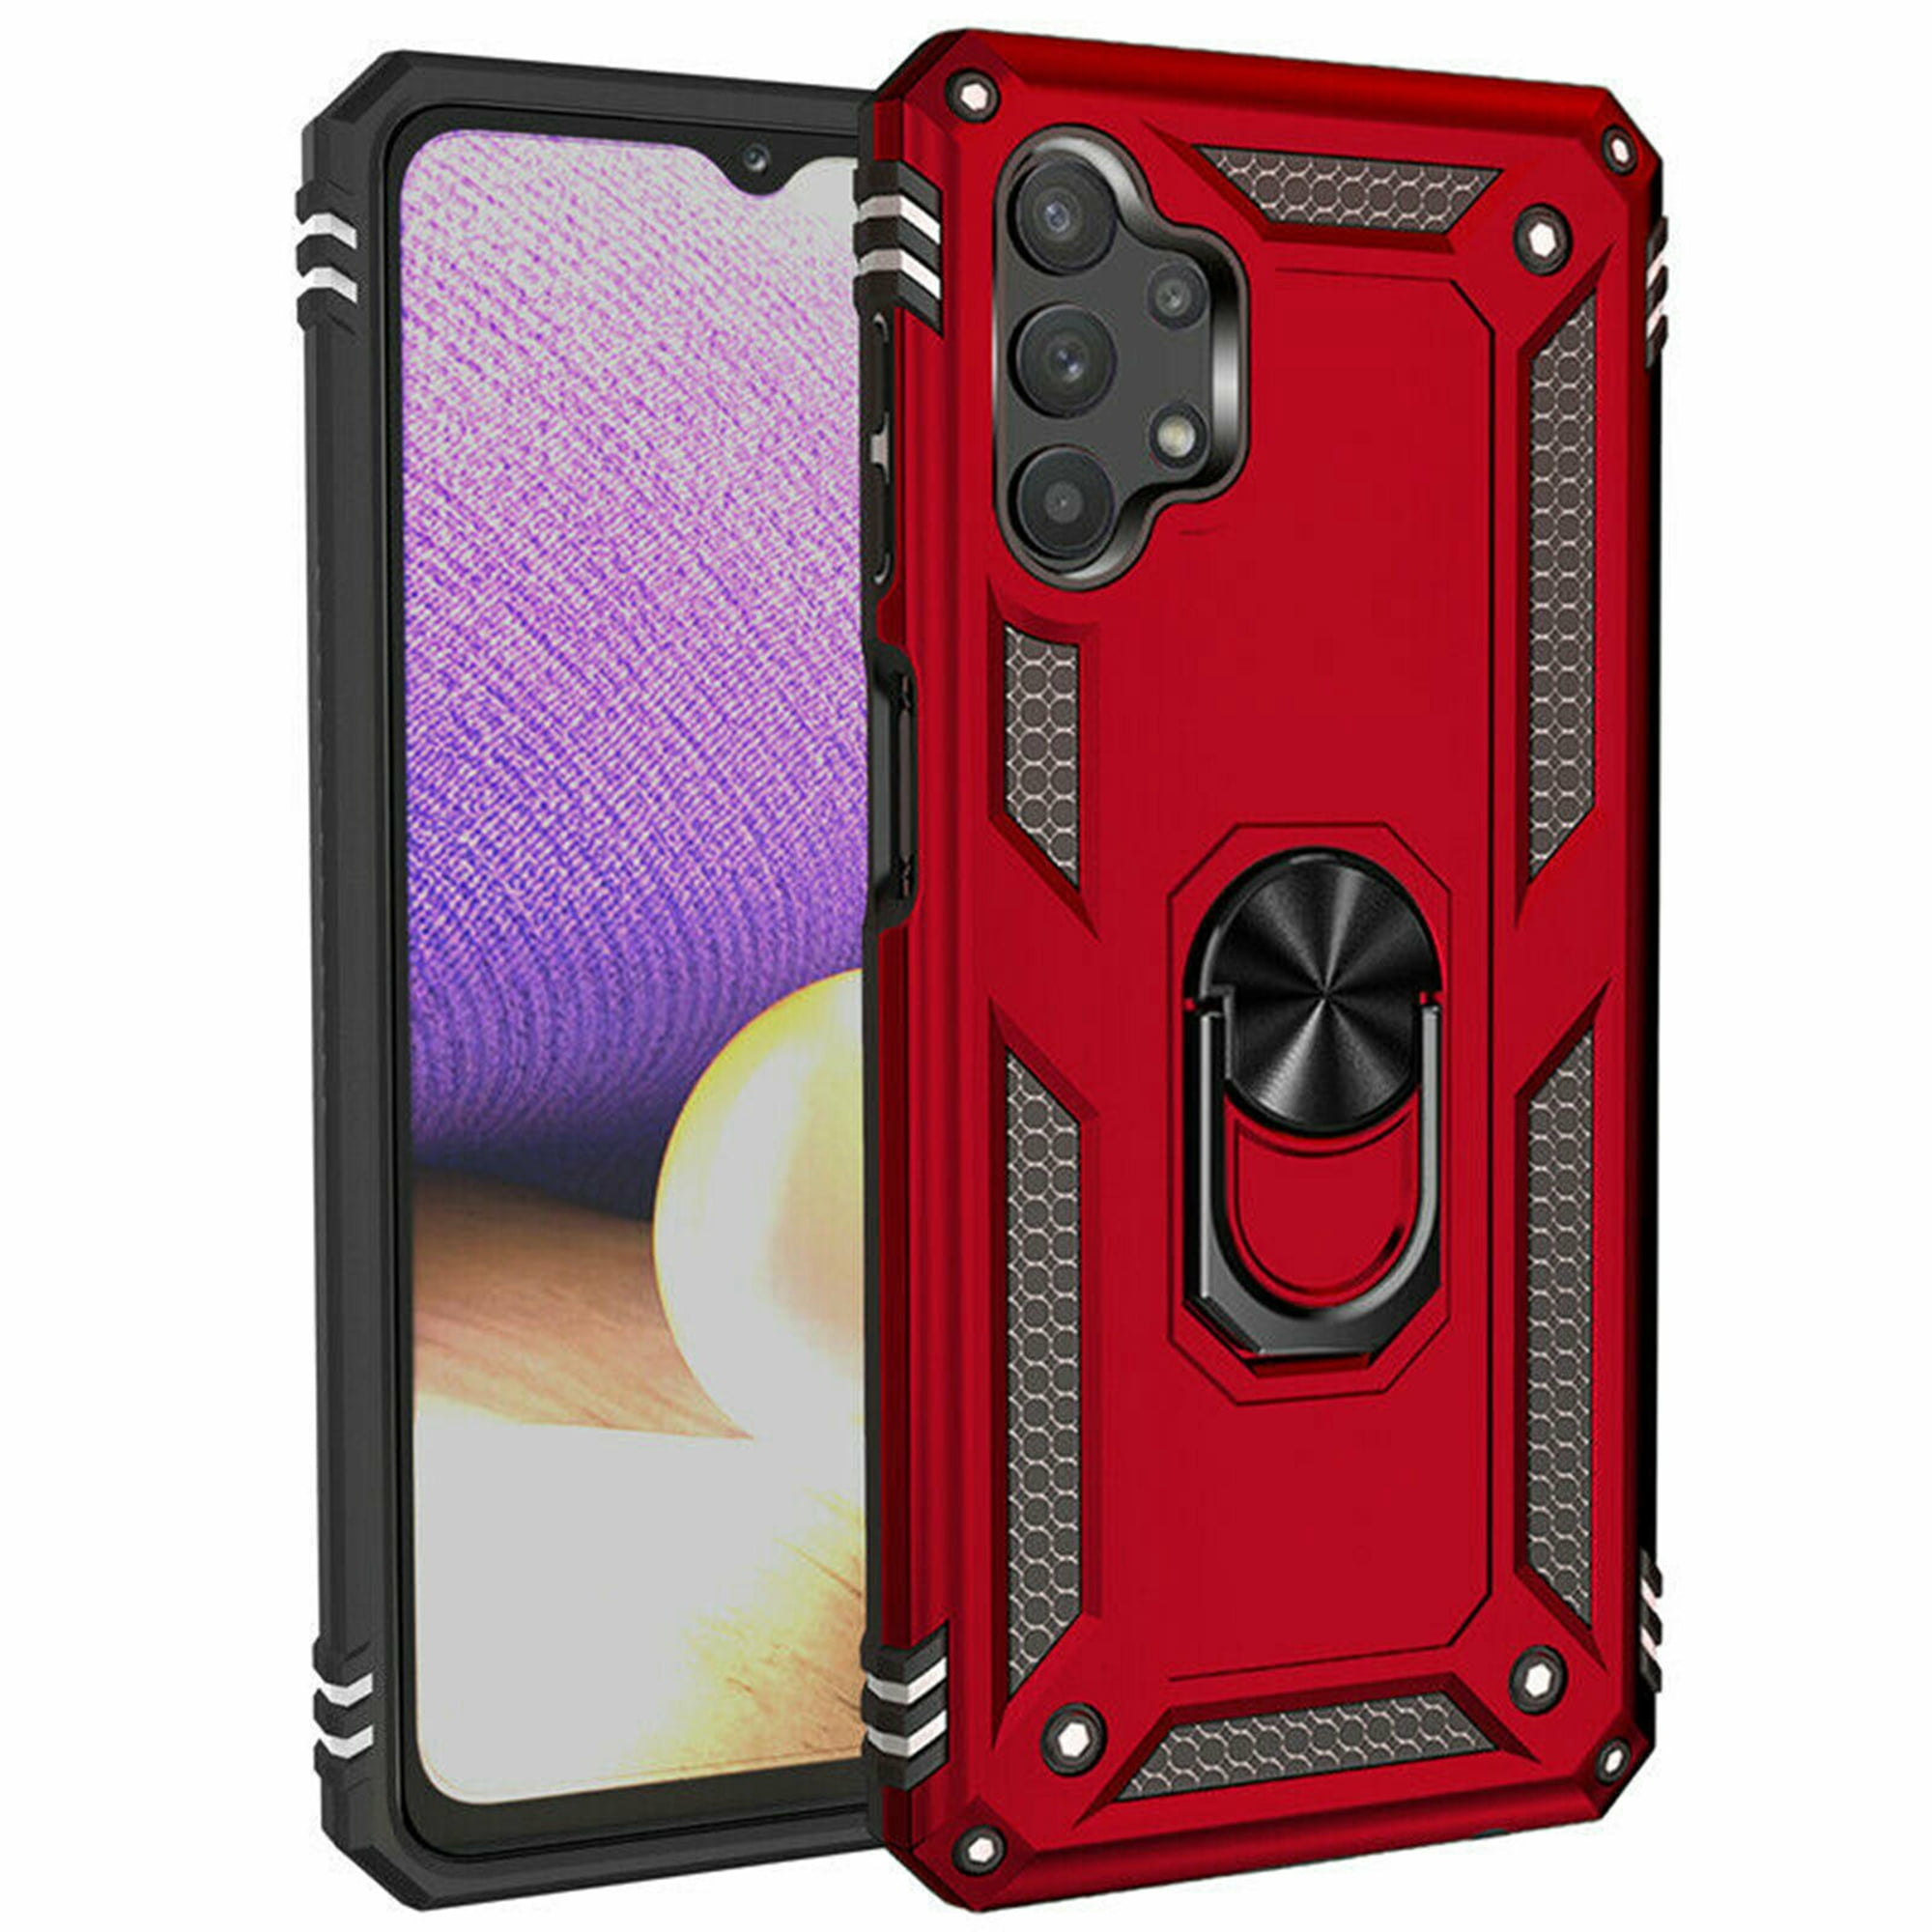 Dteck Case For Samsung Galaxy A32 4G (6.4 inches) 2021 Released,Shockproof Rubber Armor Case